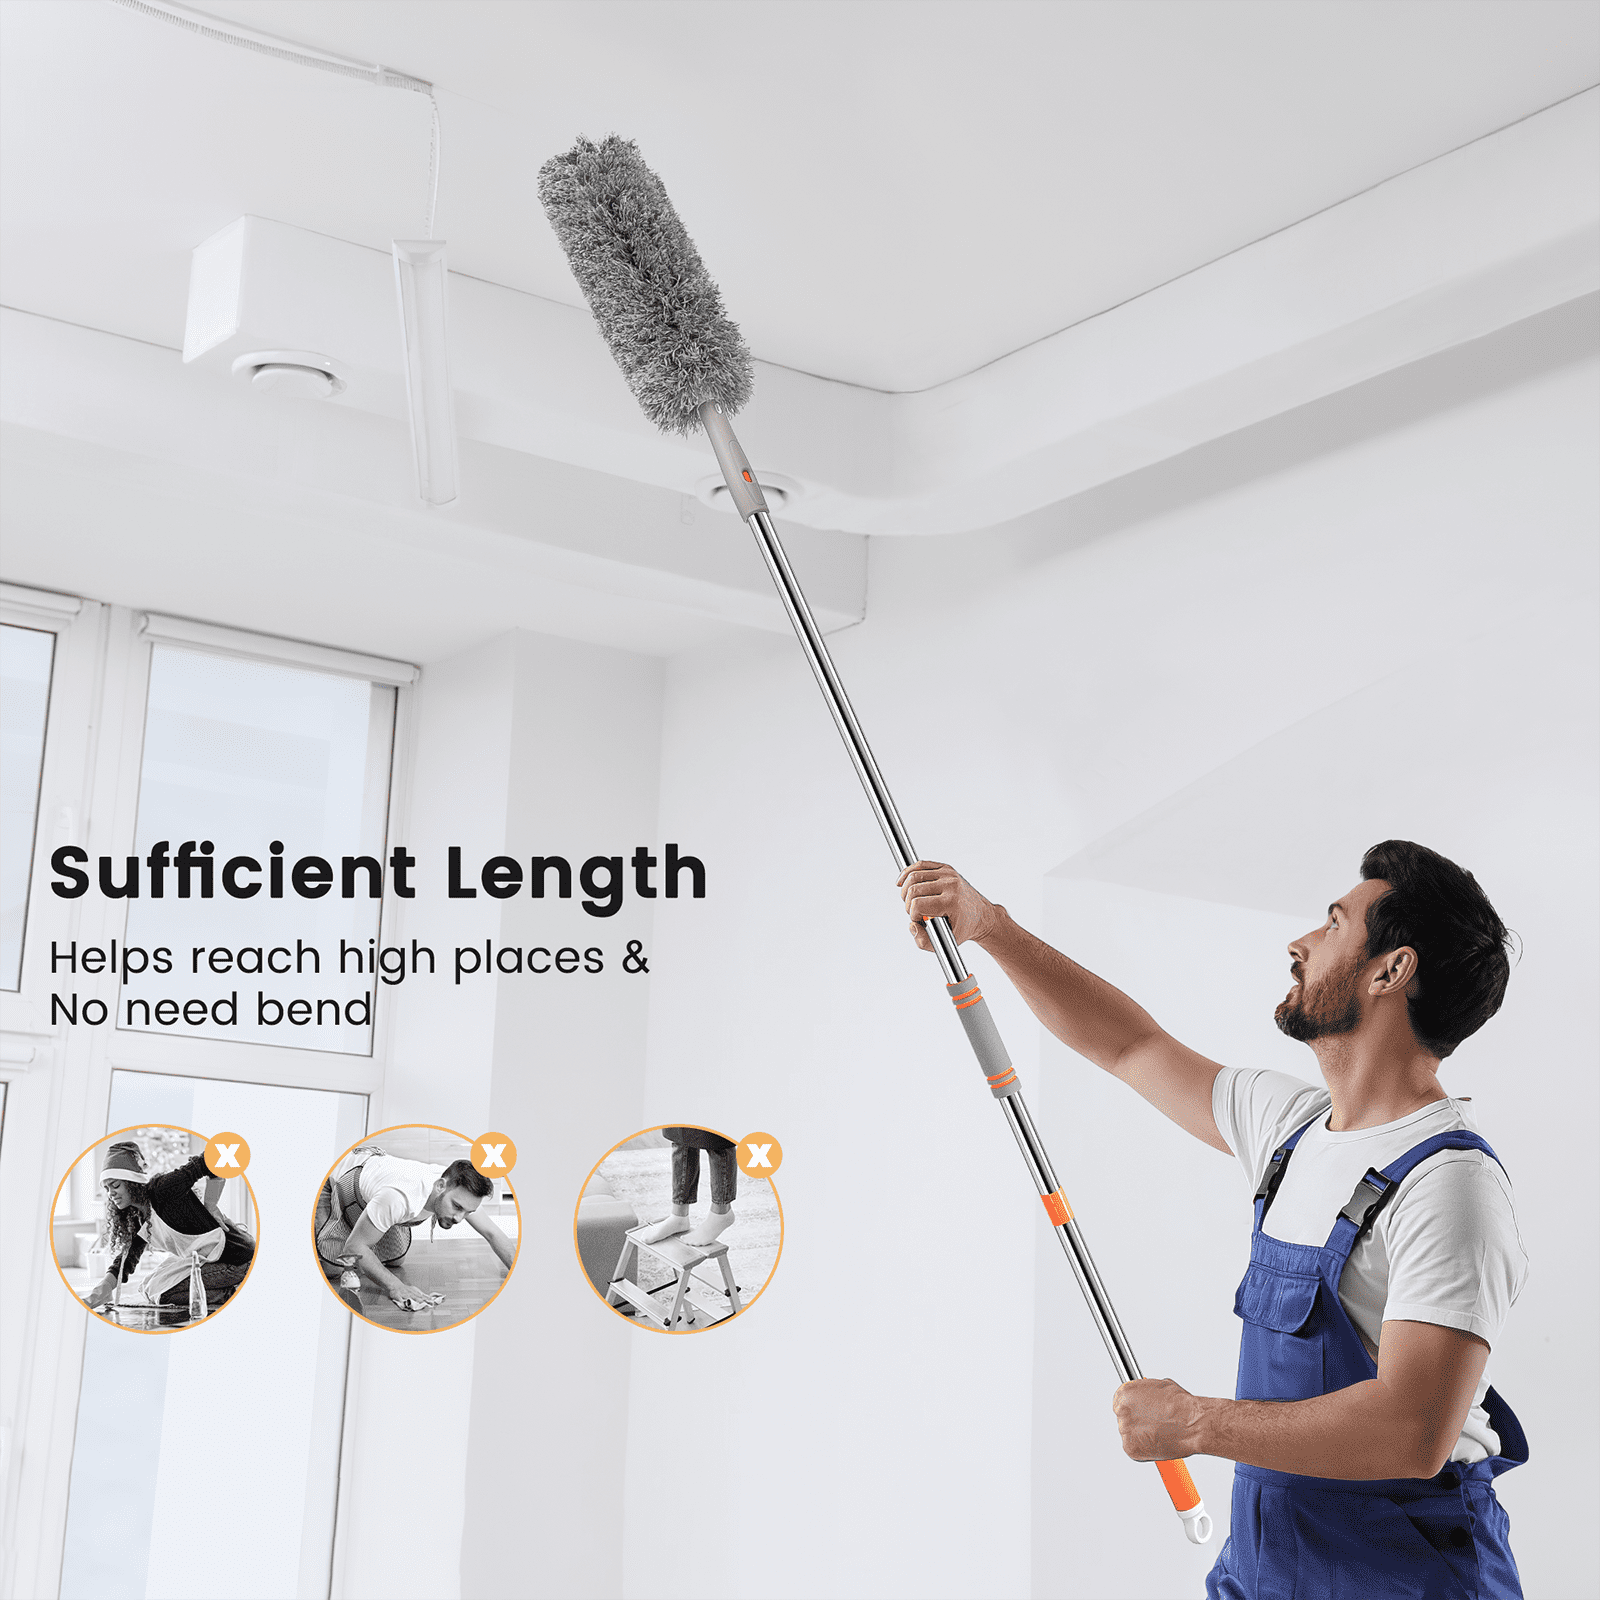 Super Multi-Functional Handheld Electric Cleaning Brush - For Light Sleepers